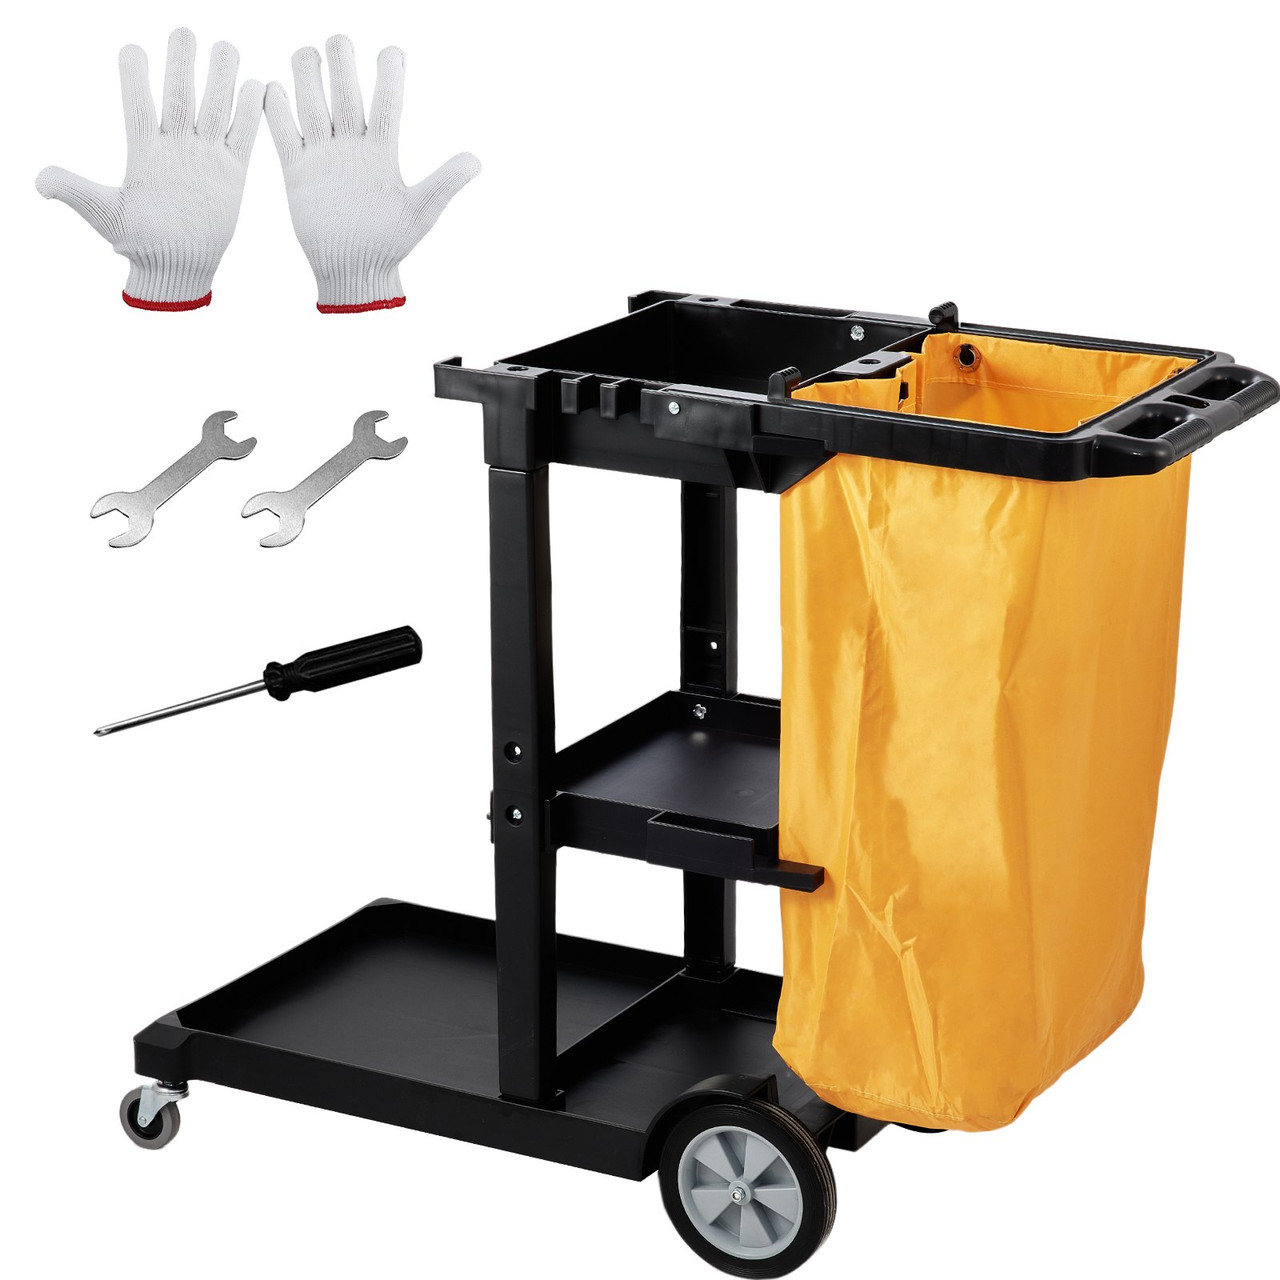 Cleaning Cart, 3-Shelf Commercial Janitorial Cart, 200 lbs Capacity Plastic Housekeeping Cart, with 25 Gallon PVC Bag, 47 x 20 x 38.6in, Yellow&Black